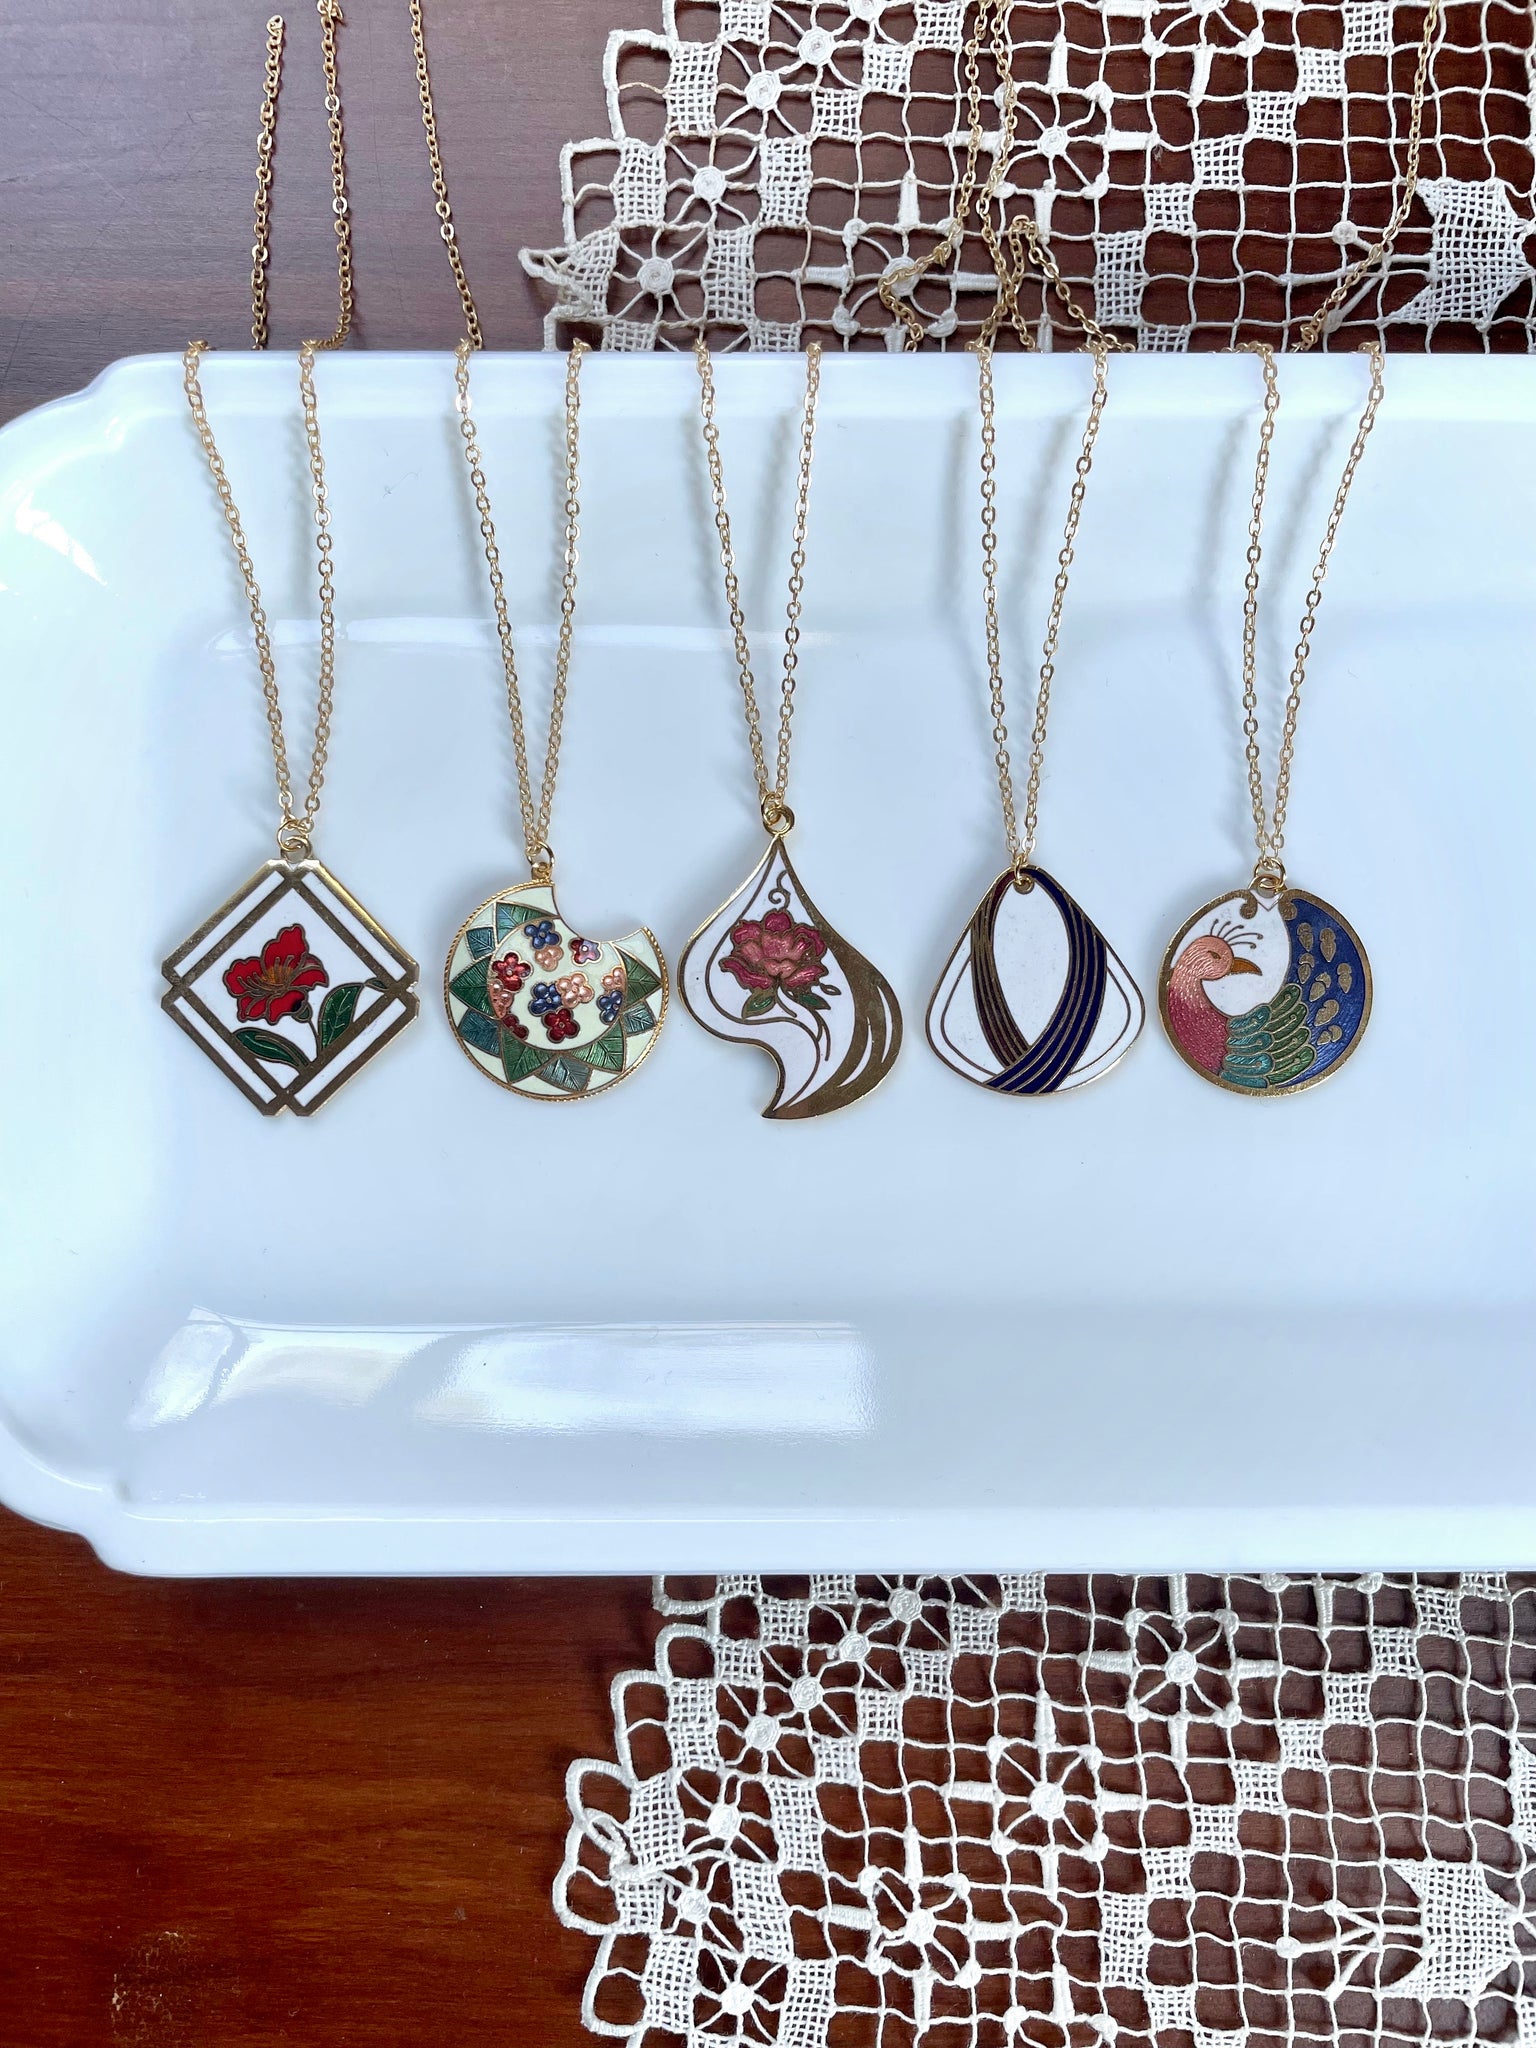 White and Colorful Vintage Enamel Pendant Necklace